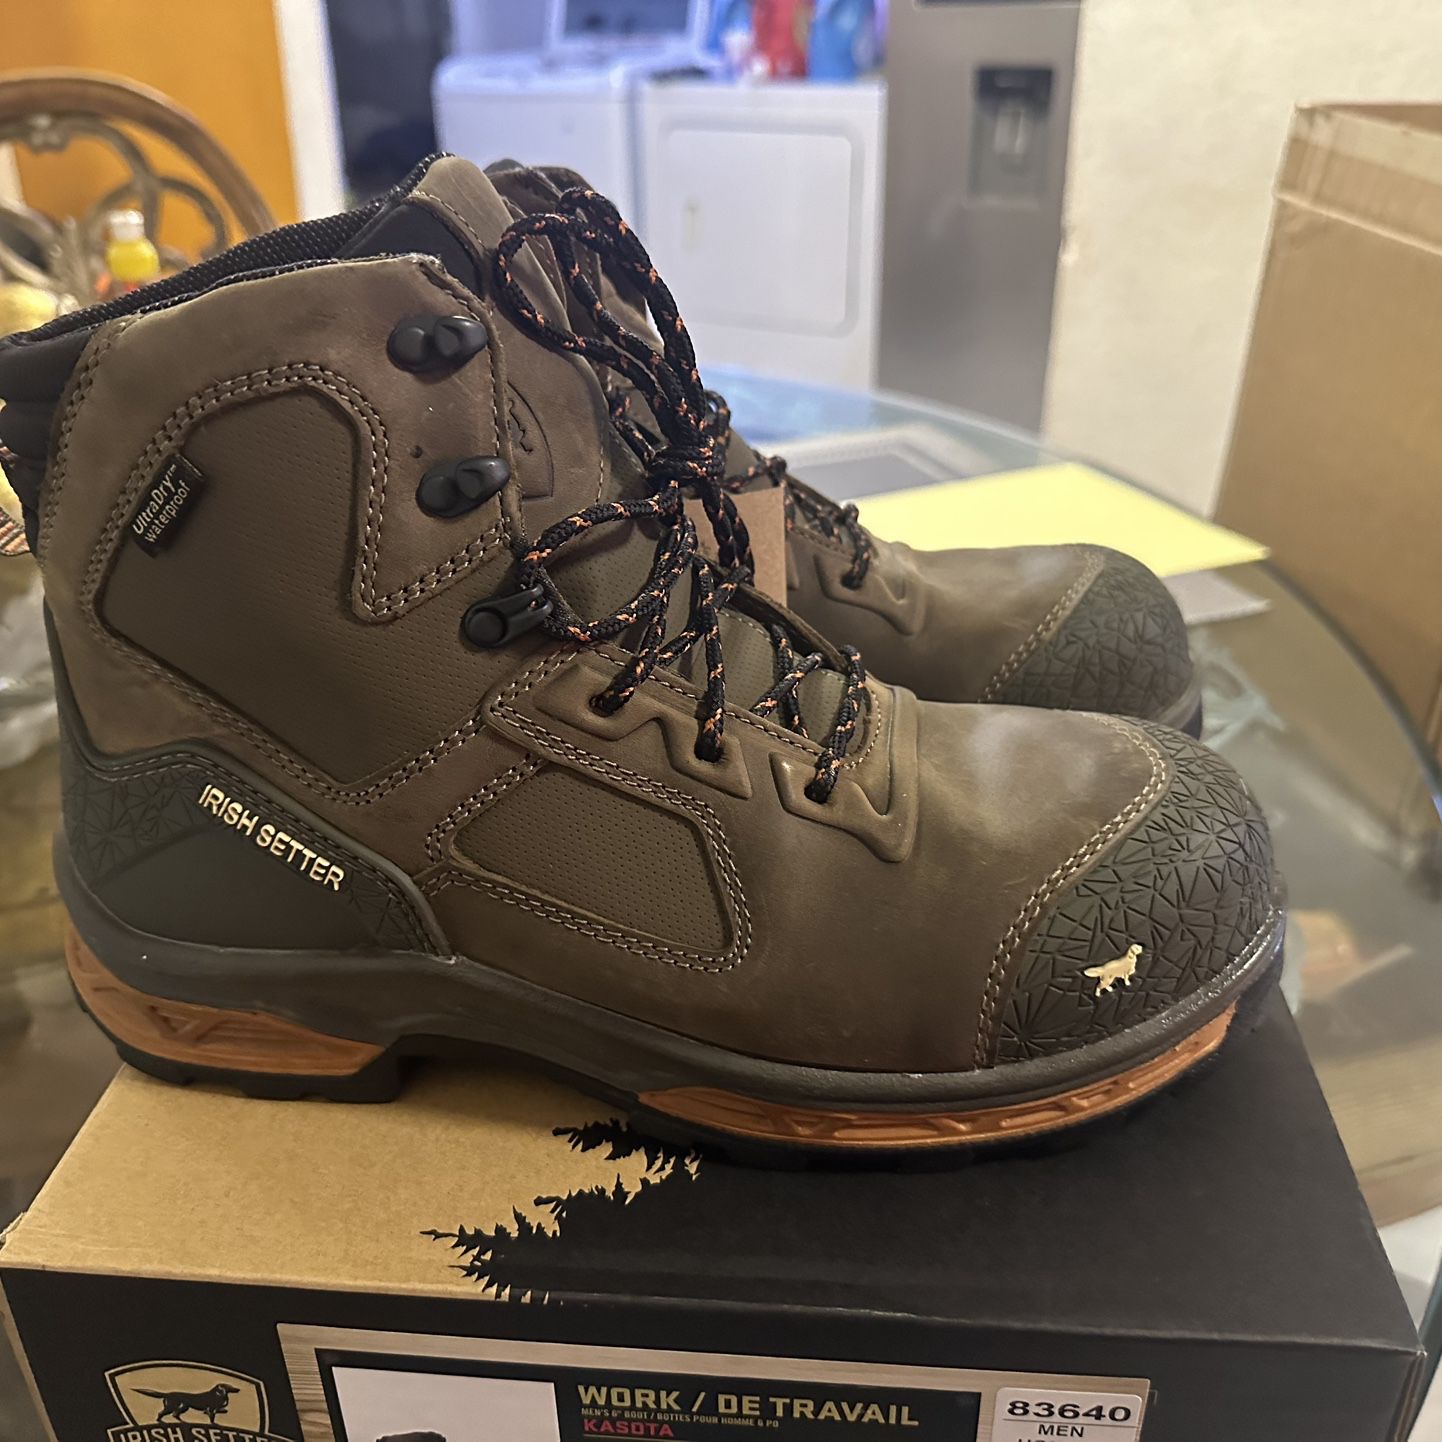 Brand New Irish Setter Boots By Red Wing